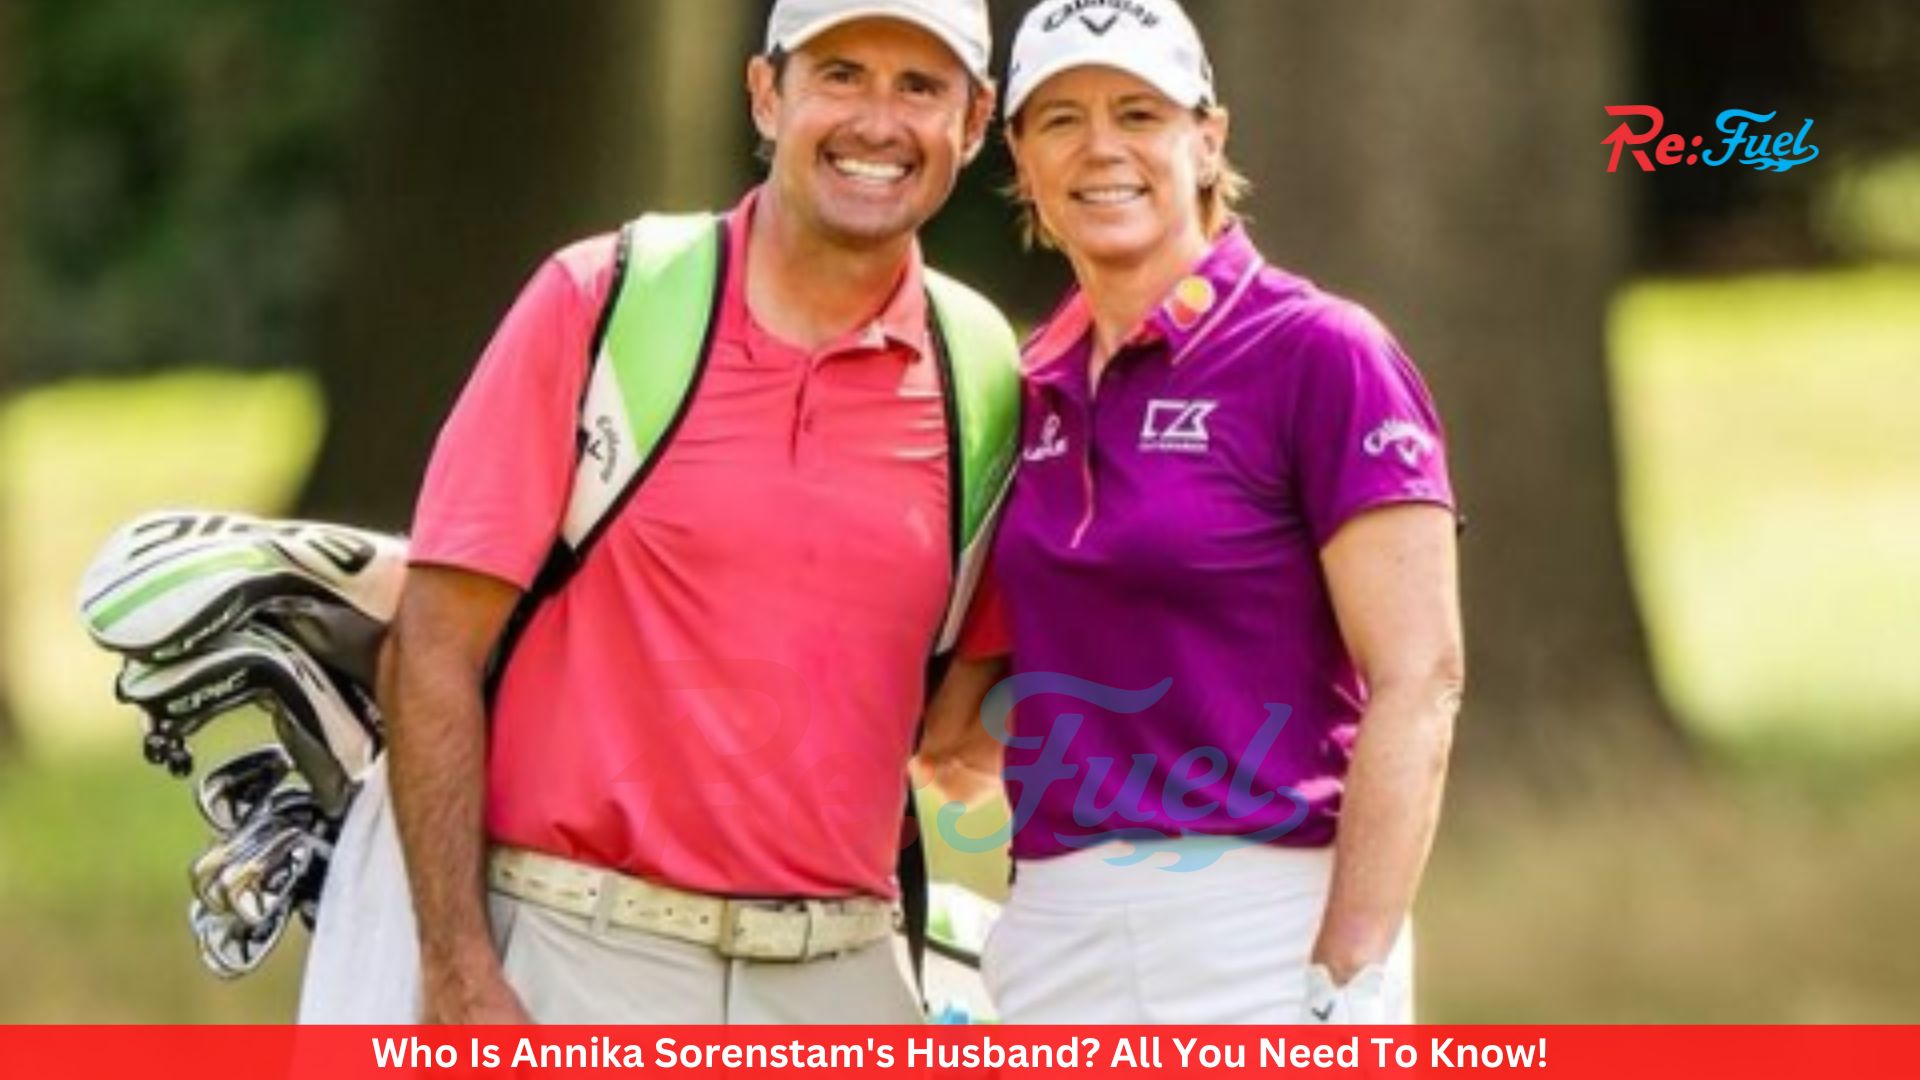 Who Is Annika Sorenstam's Husband? All You Need To Know!